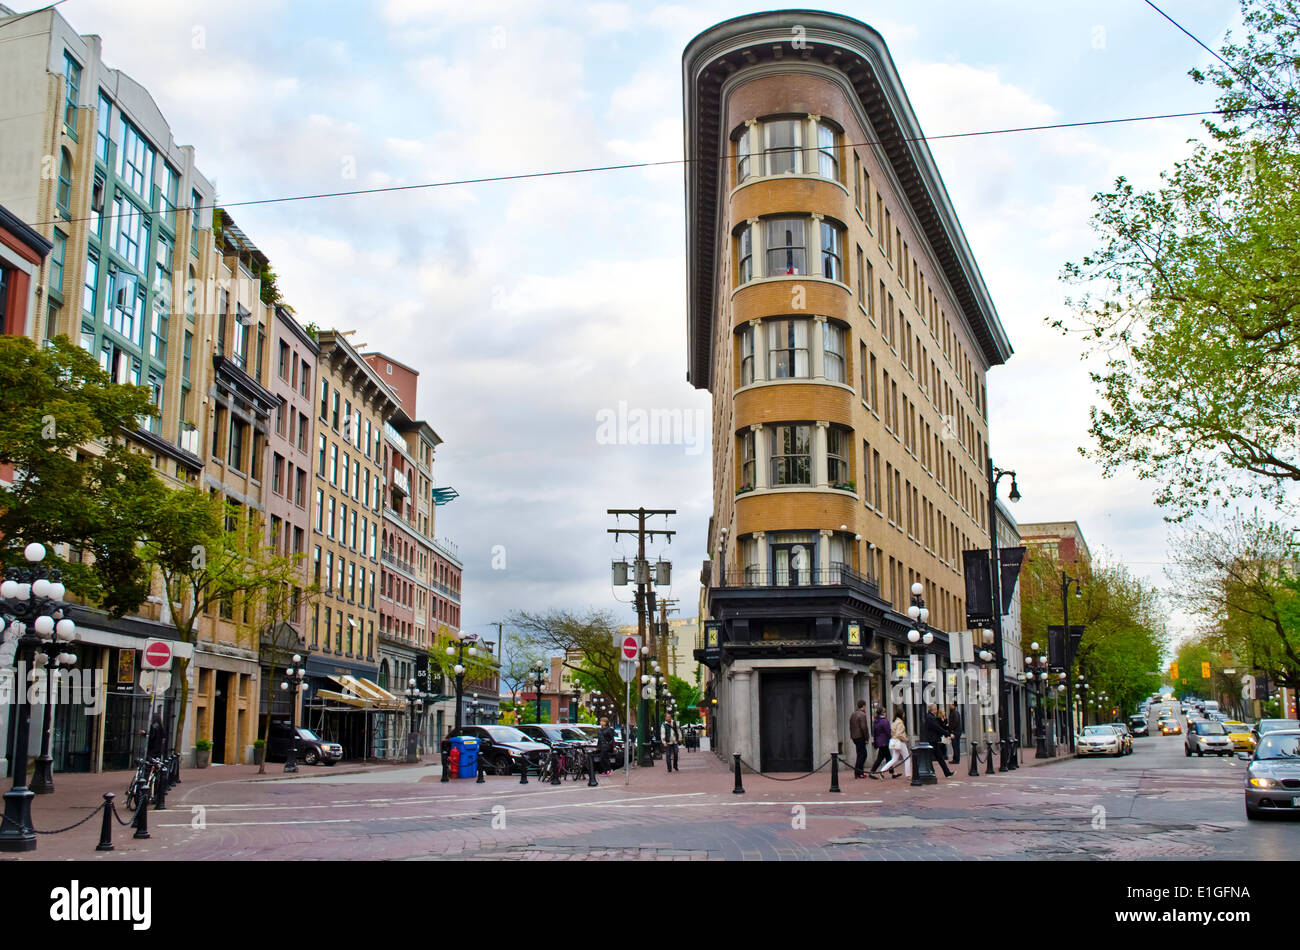 Hotel Europe building in Vancouver's Gastown neighbourhood.  Historic building in flatiron style. Stock Photo